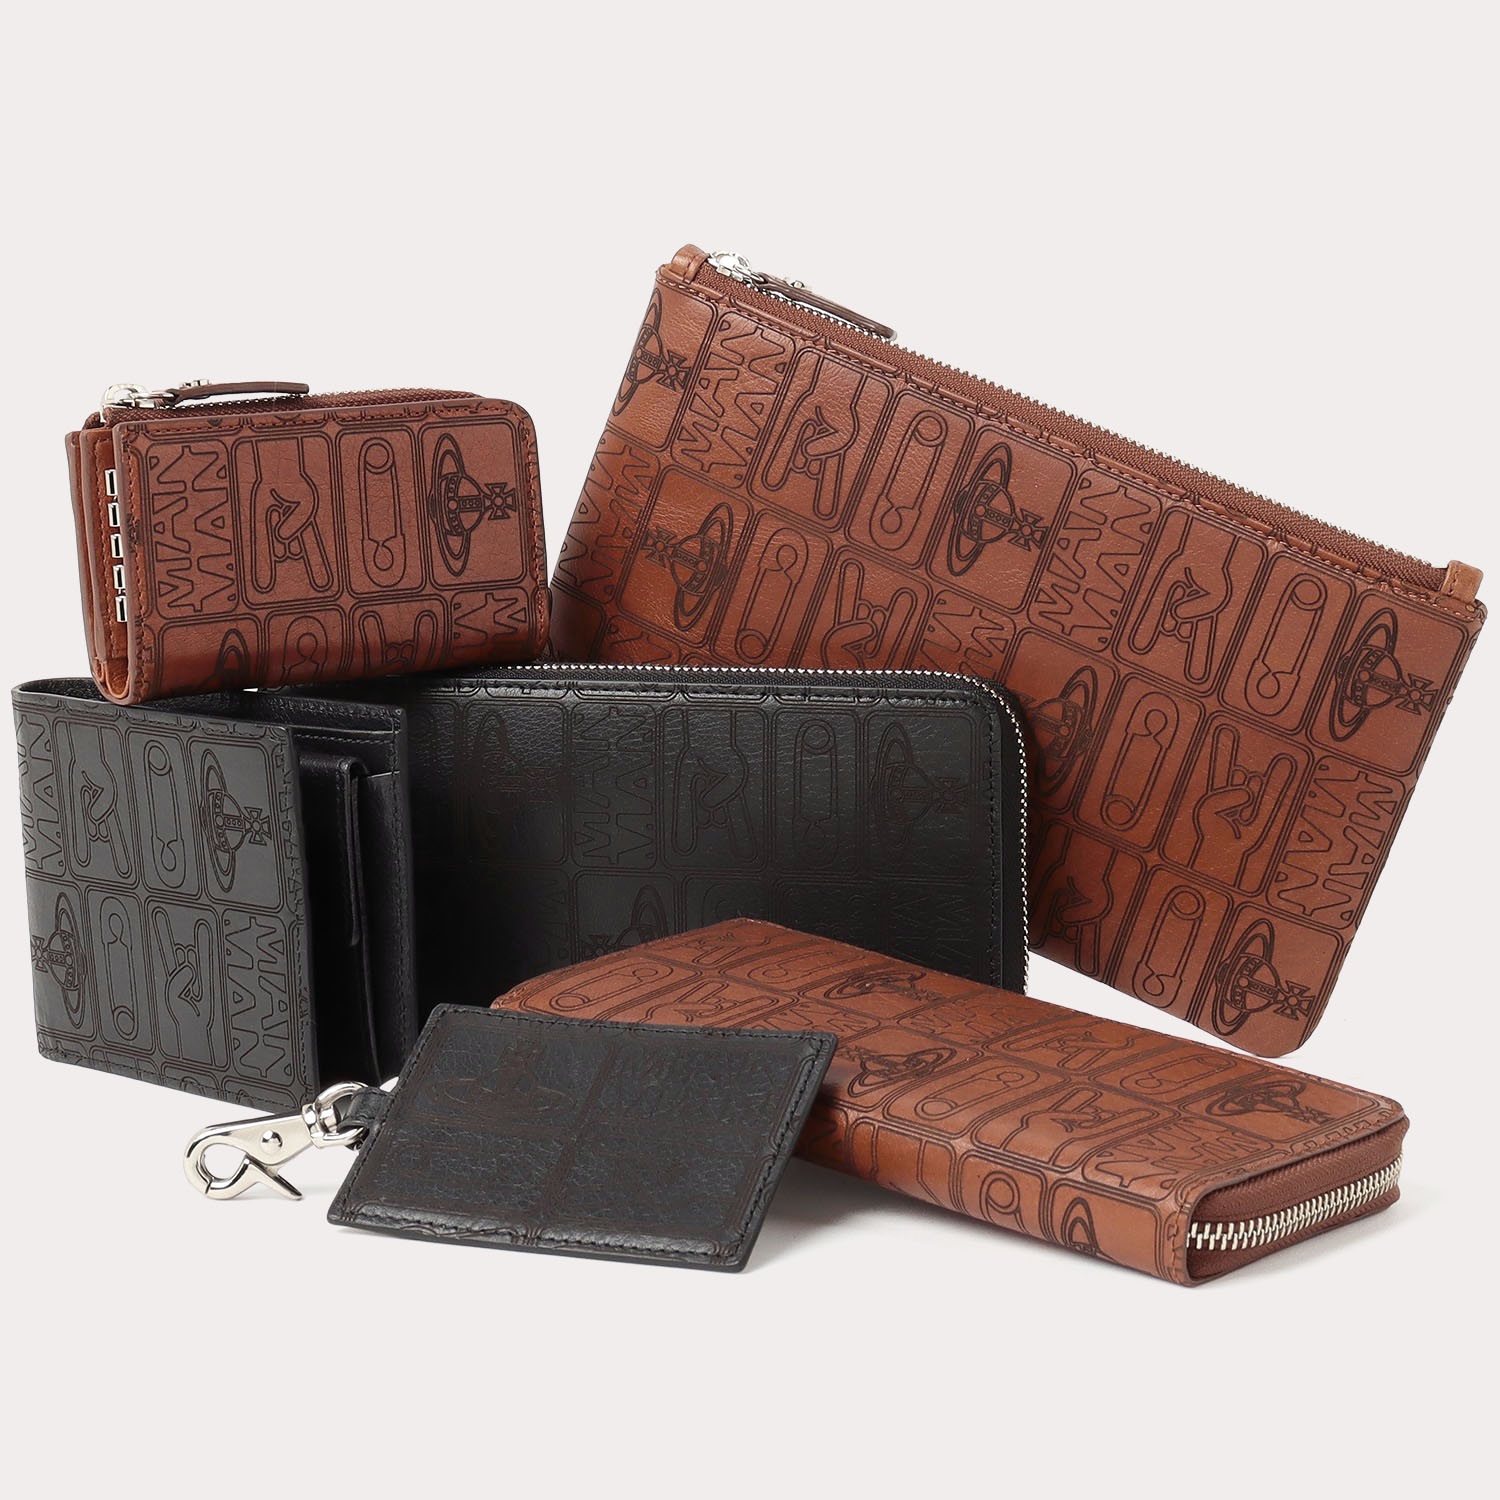 Introducing “TAG LEATHER GOODS”